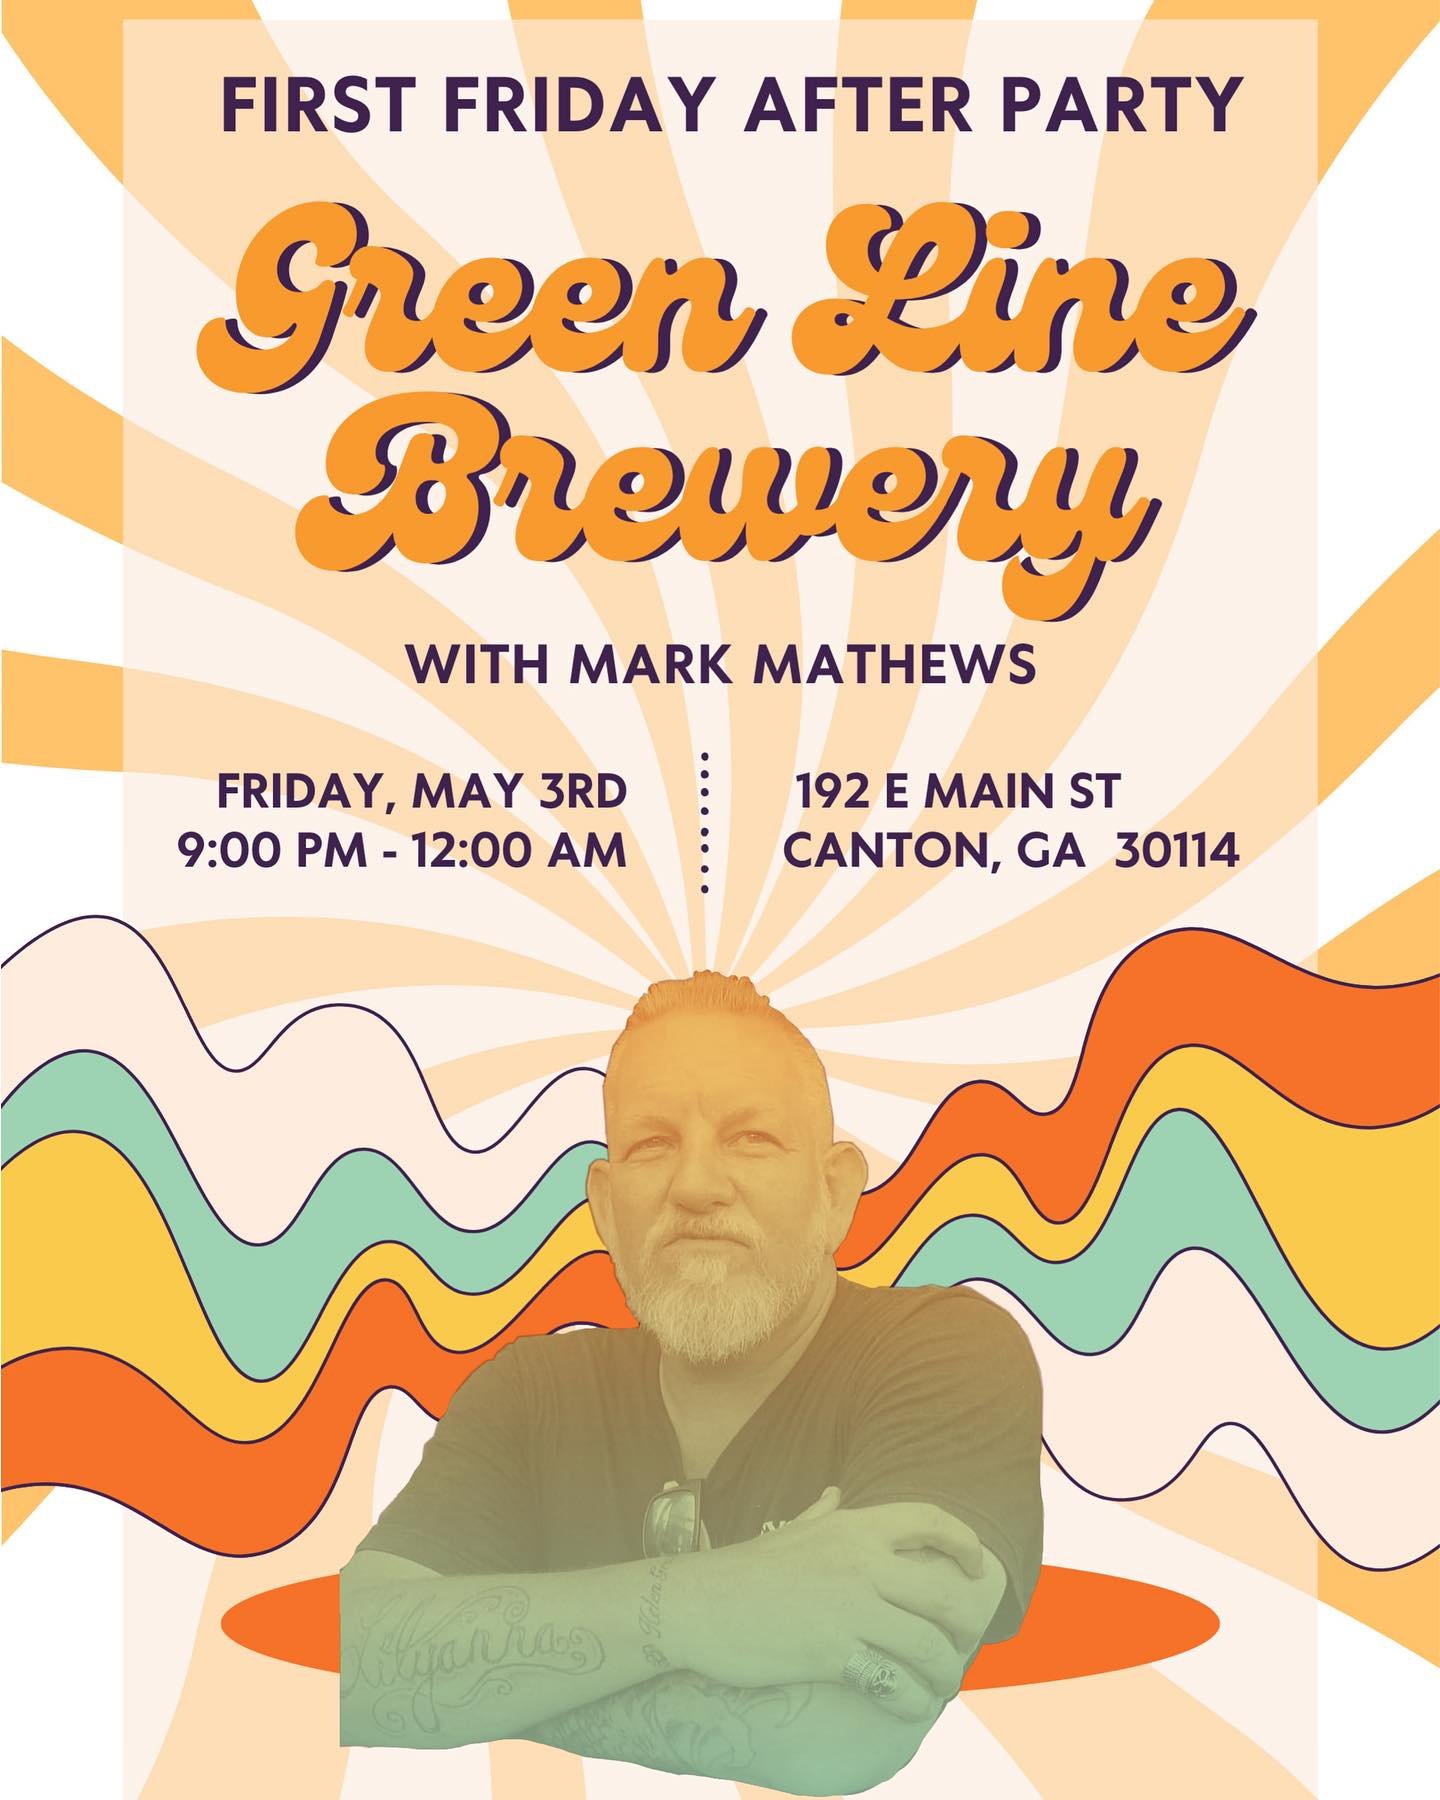 2 MORE DAYS!!! We are SO excited for our First Friday After Party, hosted by none other than @markmathewsmuzic ! Come see him from 9-12 AM right outside our doors. We can&rsquo;t wait!🍺🌅🌞🤙🏼✨ #GreenLineBrewery 

#CantonGA #DowntownCantonGA #Canto